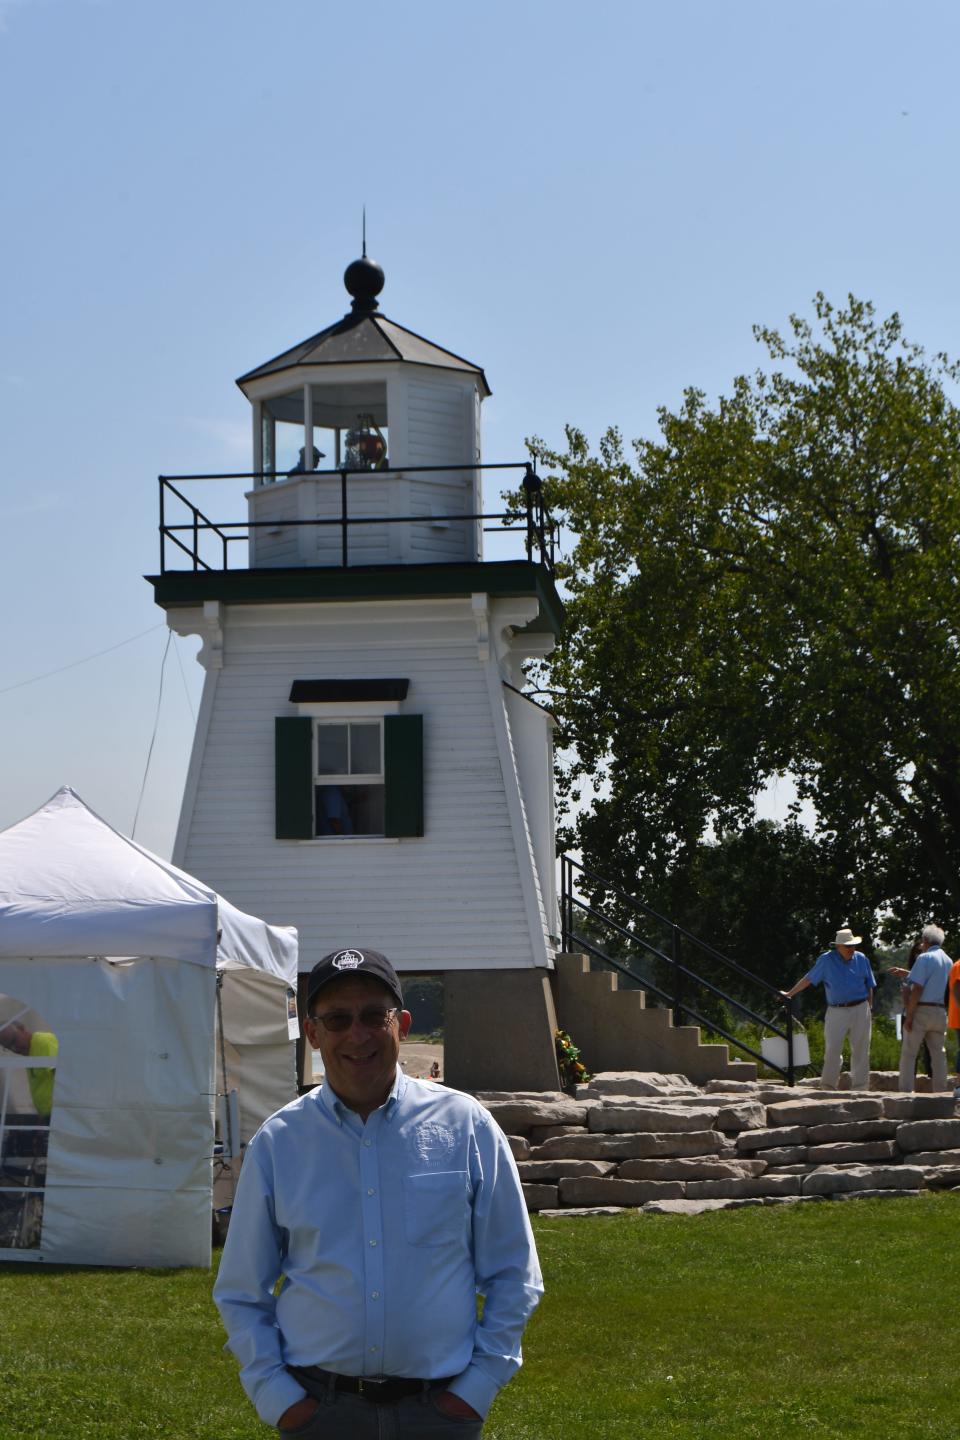 Rich Norgard, president of the Port Clinton Lighthouse Conservancy, attended the lighthouse festival.